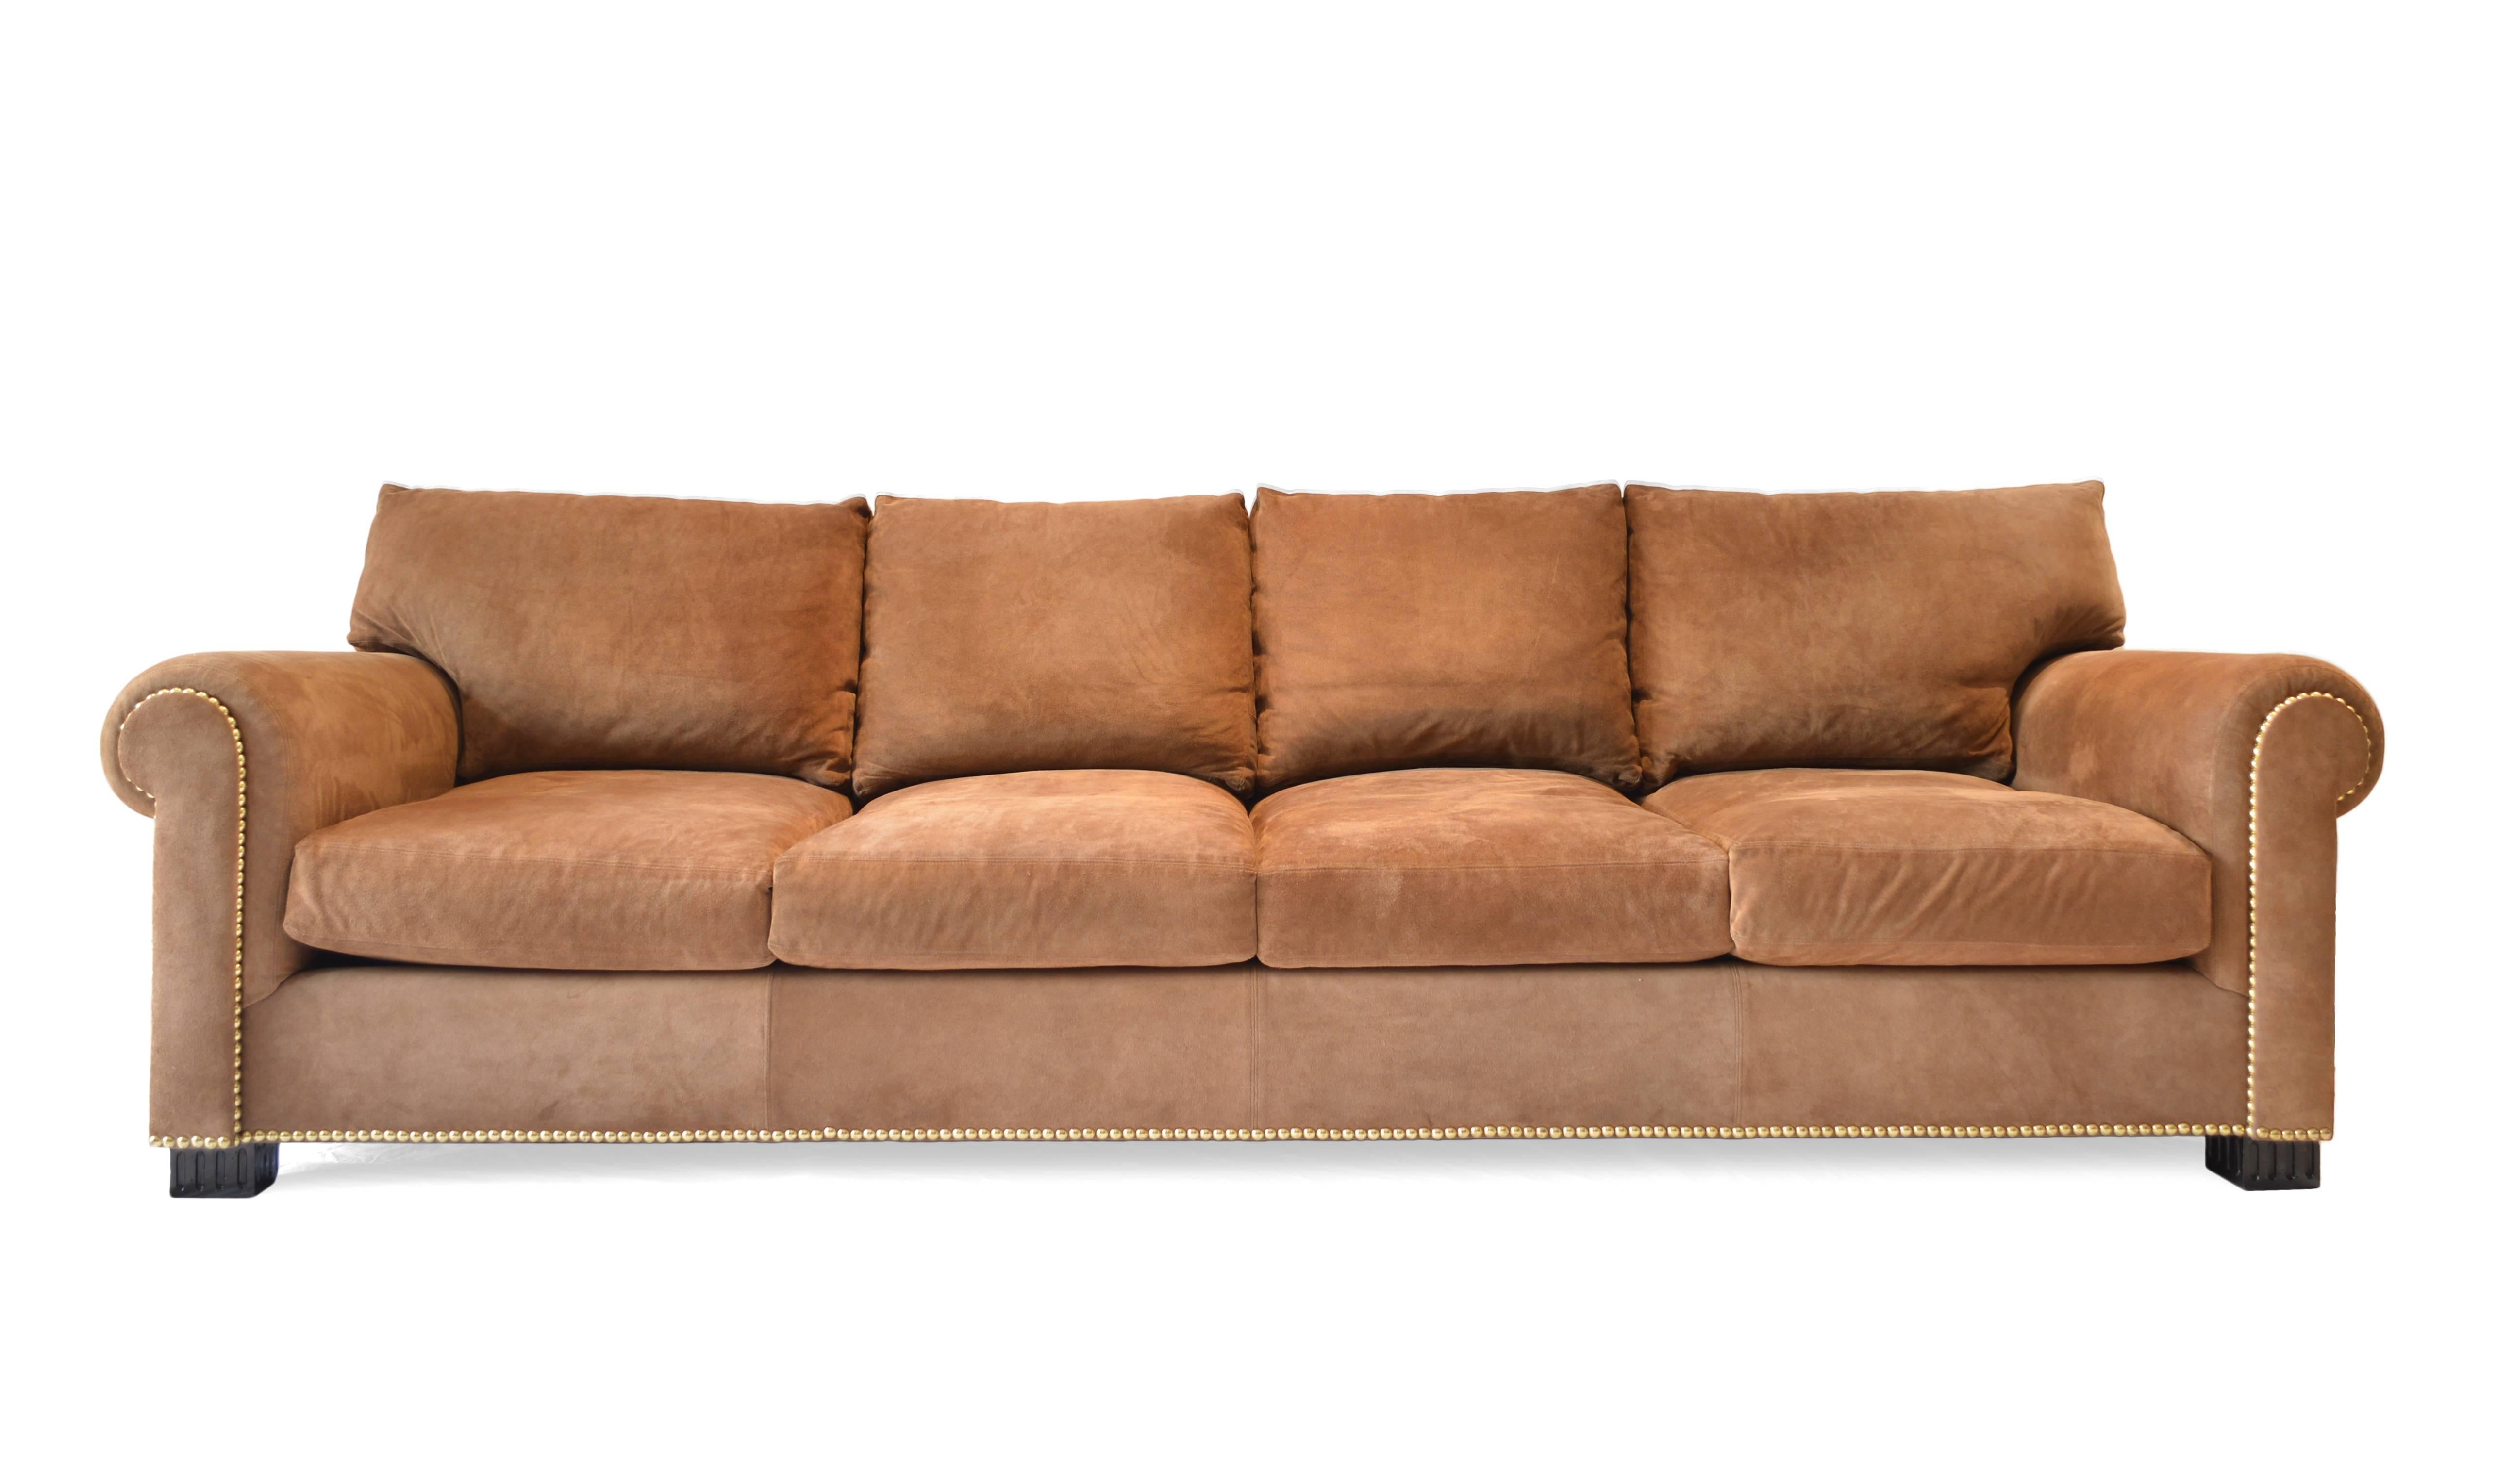 Suede Rolled Arm Sofa by Ralph Lauren at 1stDibs | ralph lauren sofa, tan  suede couch, sofa suede